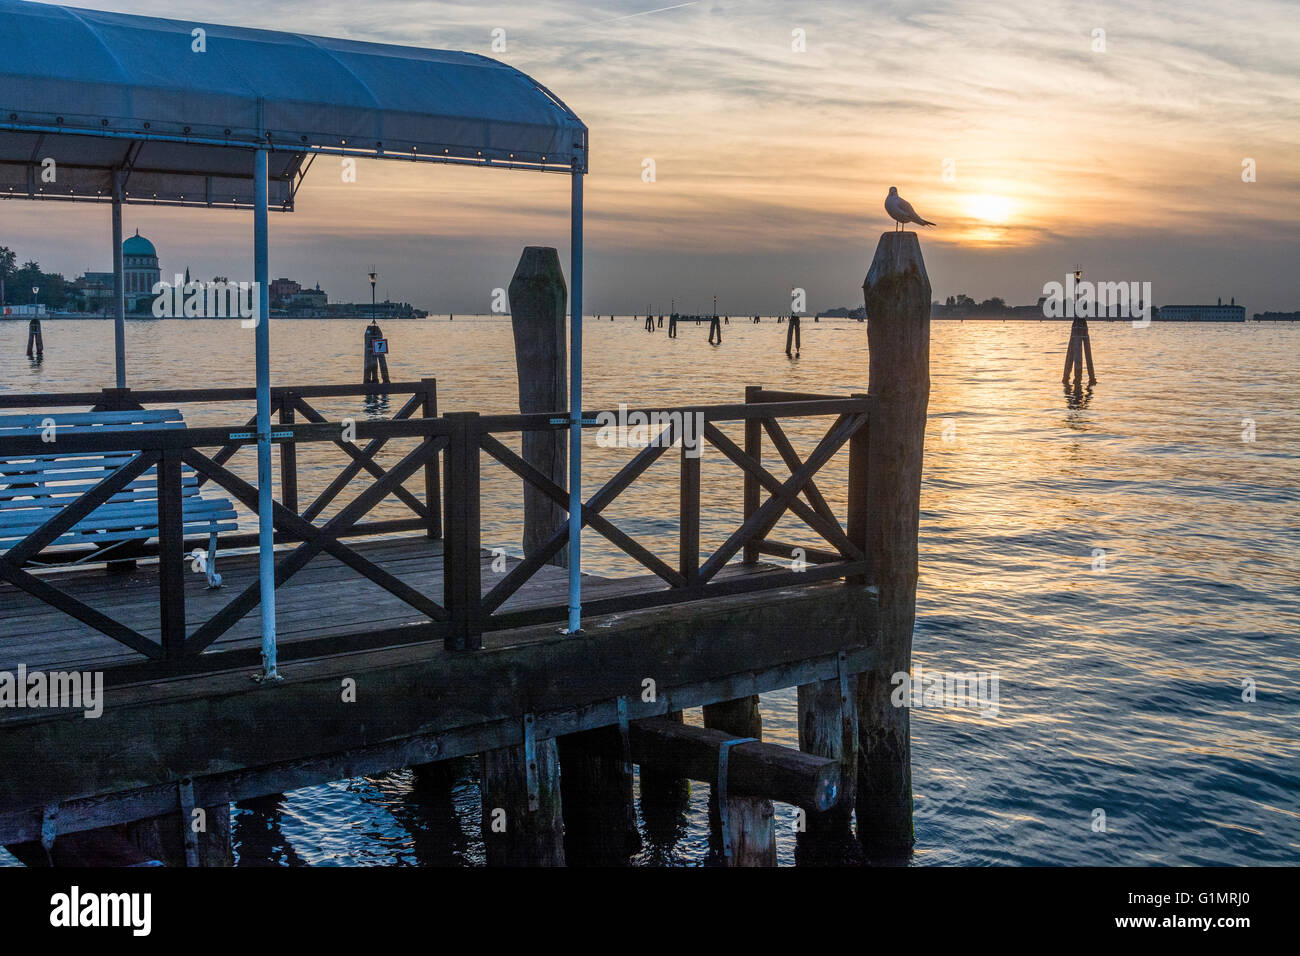 Jetty on Lido island at sunset, Venice in the background Stock Photo